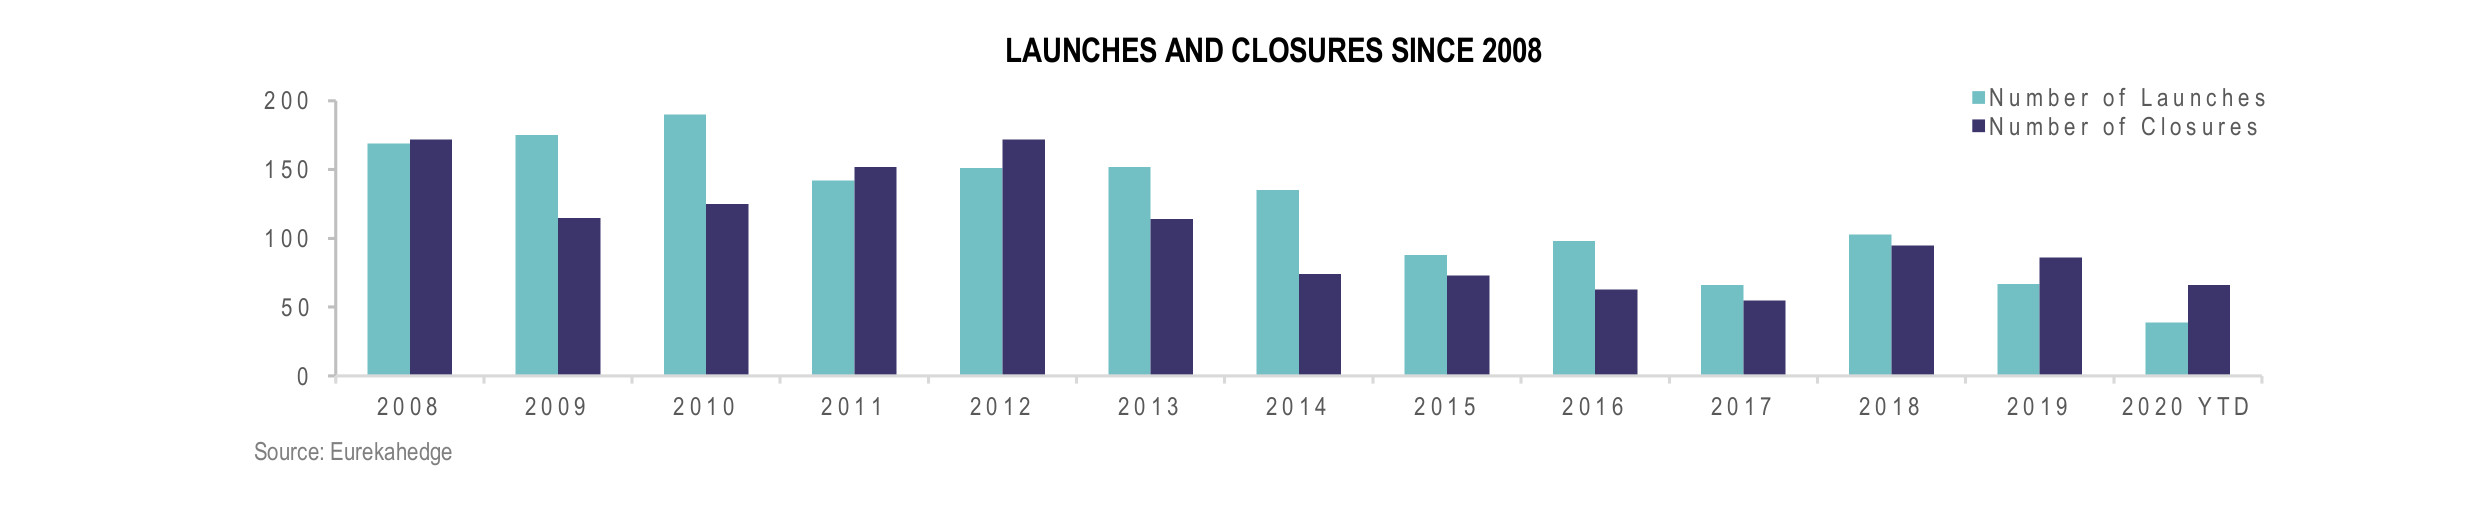 Asian Hedge Funds Infographic August 2020 - Launches and Closures